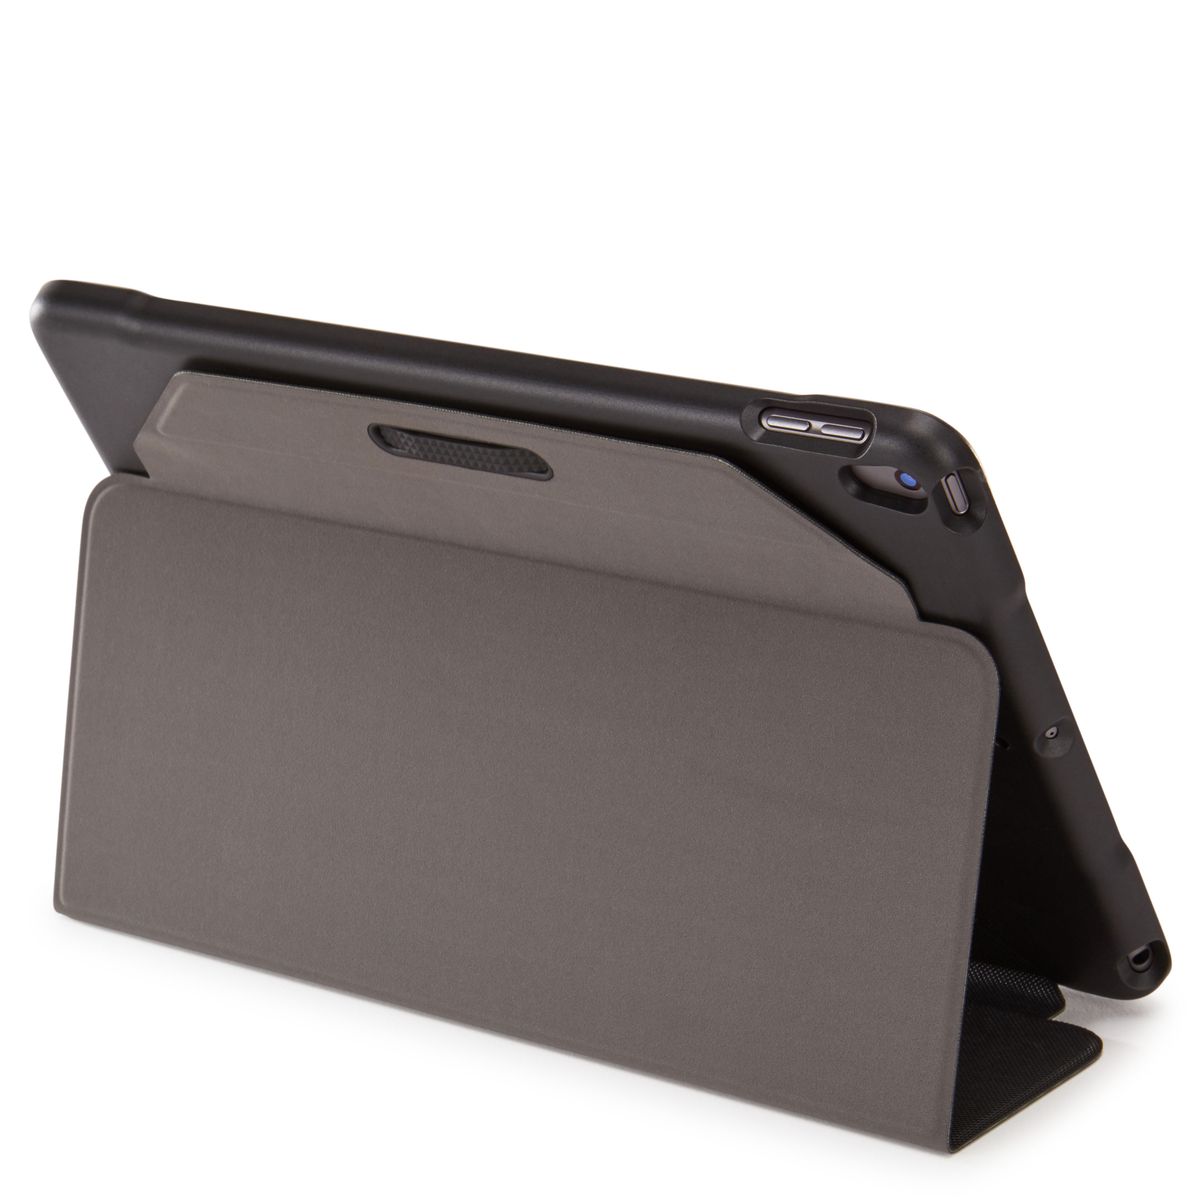 Case Logic SnapView Case for iPad Air - Black